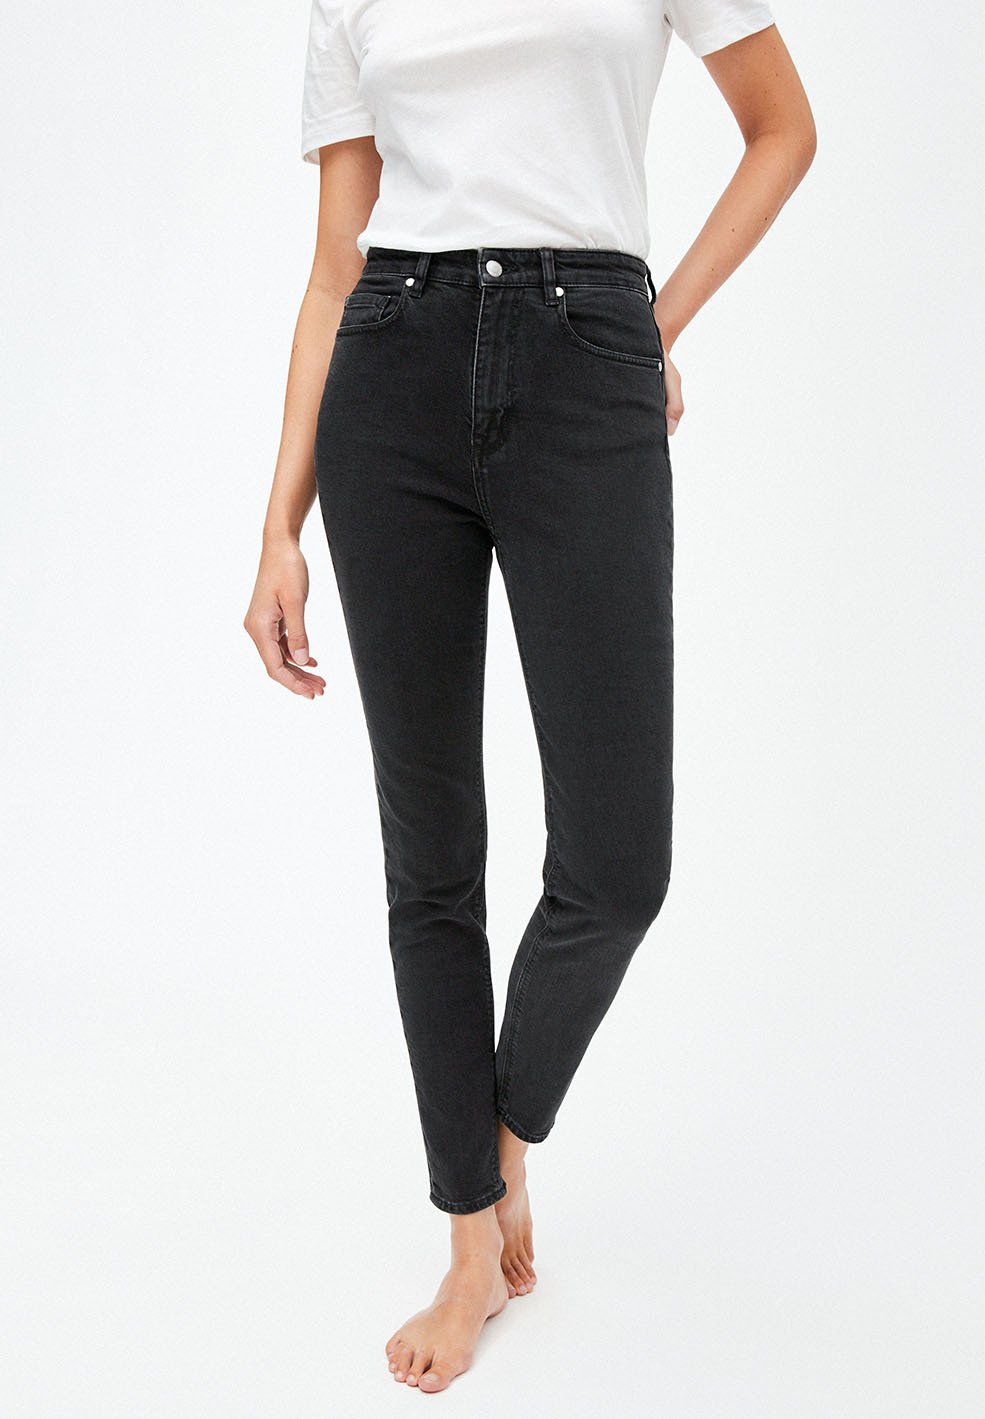 INGAA JEANS || WASHED DOWN BLACK